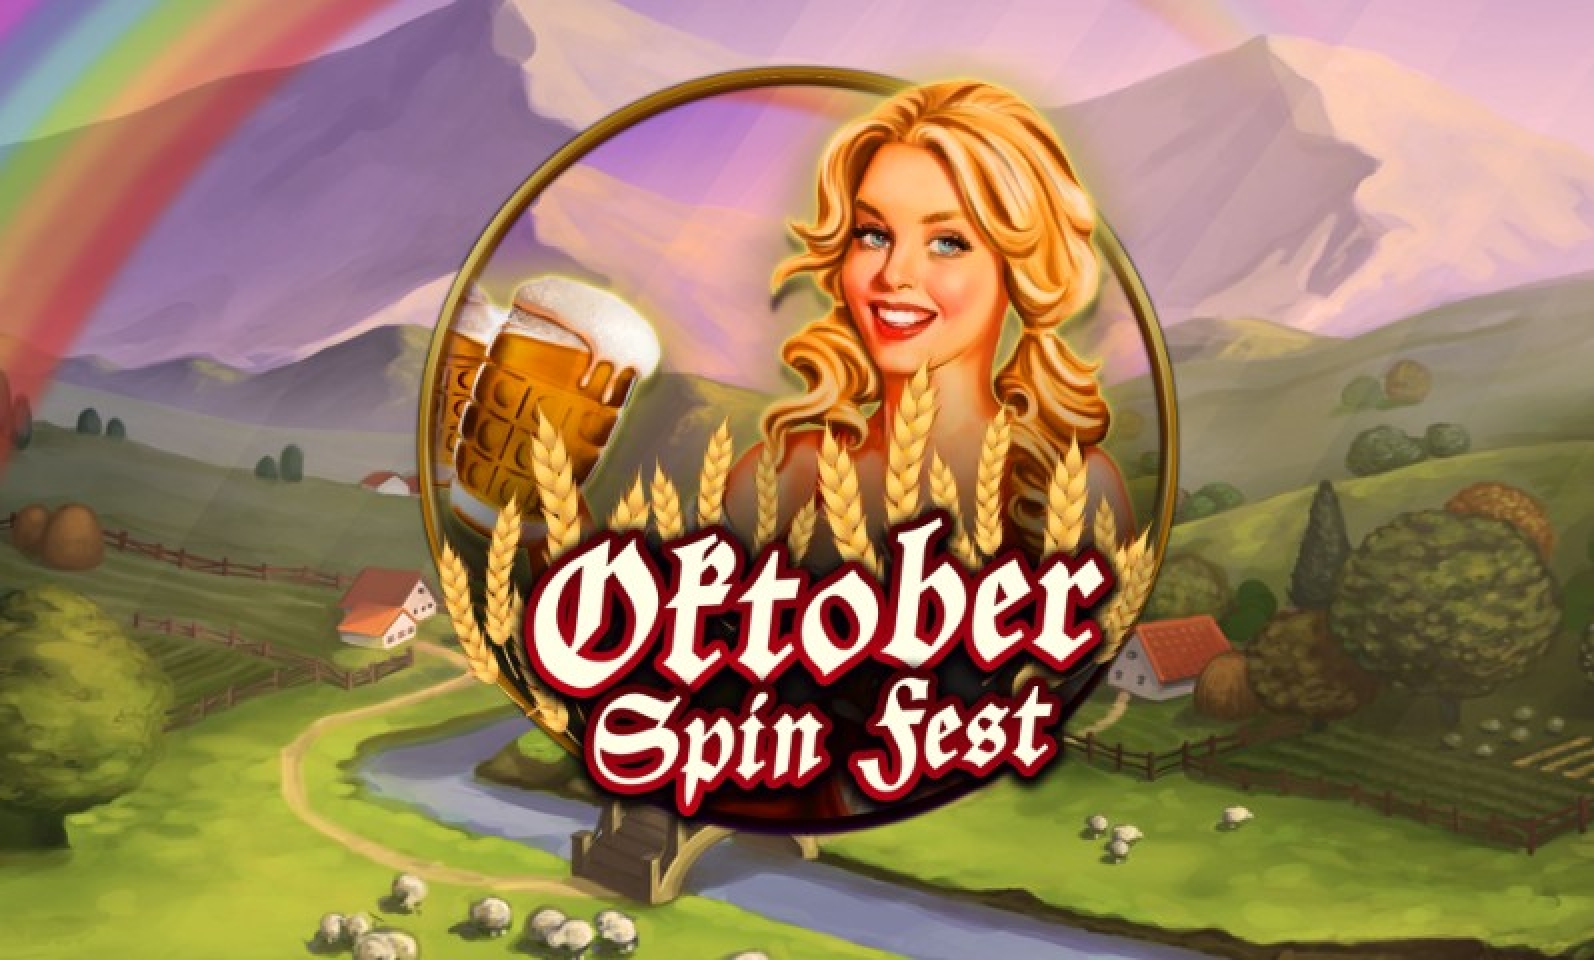 The October Spin Fest Online Slot Demo Game by Spinomenal